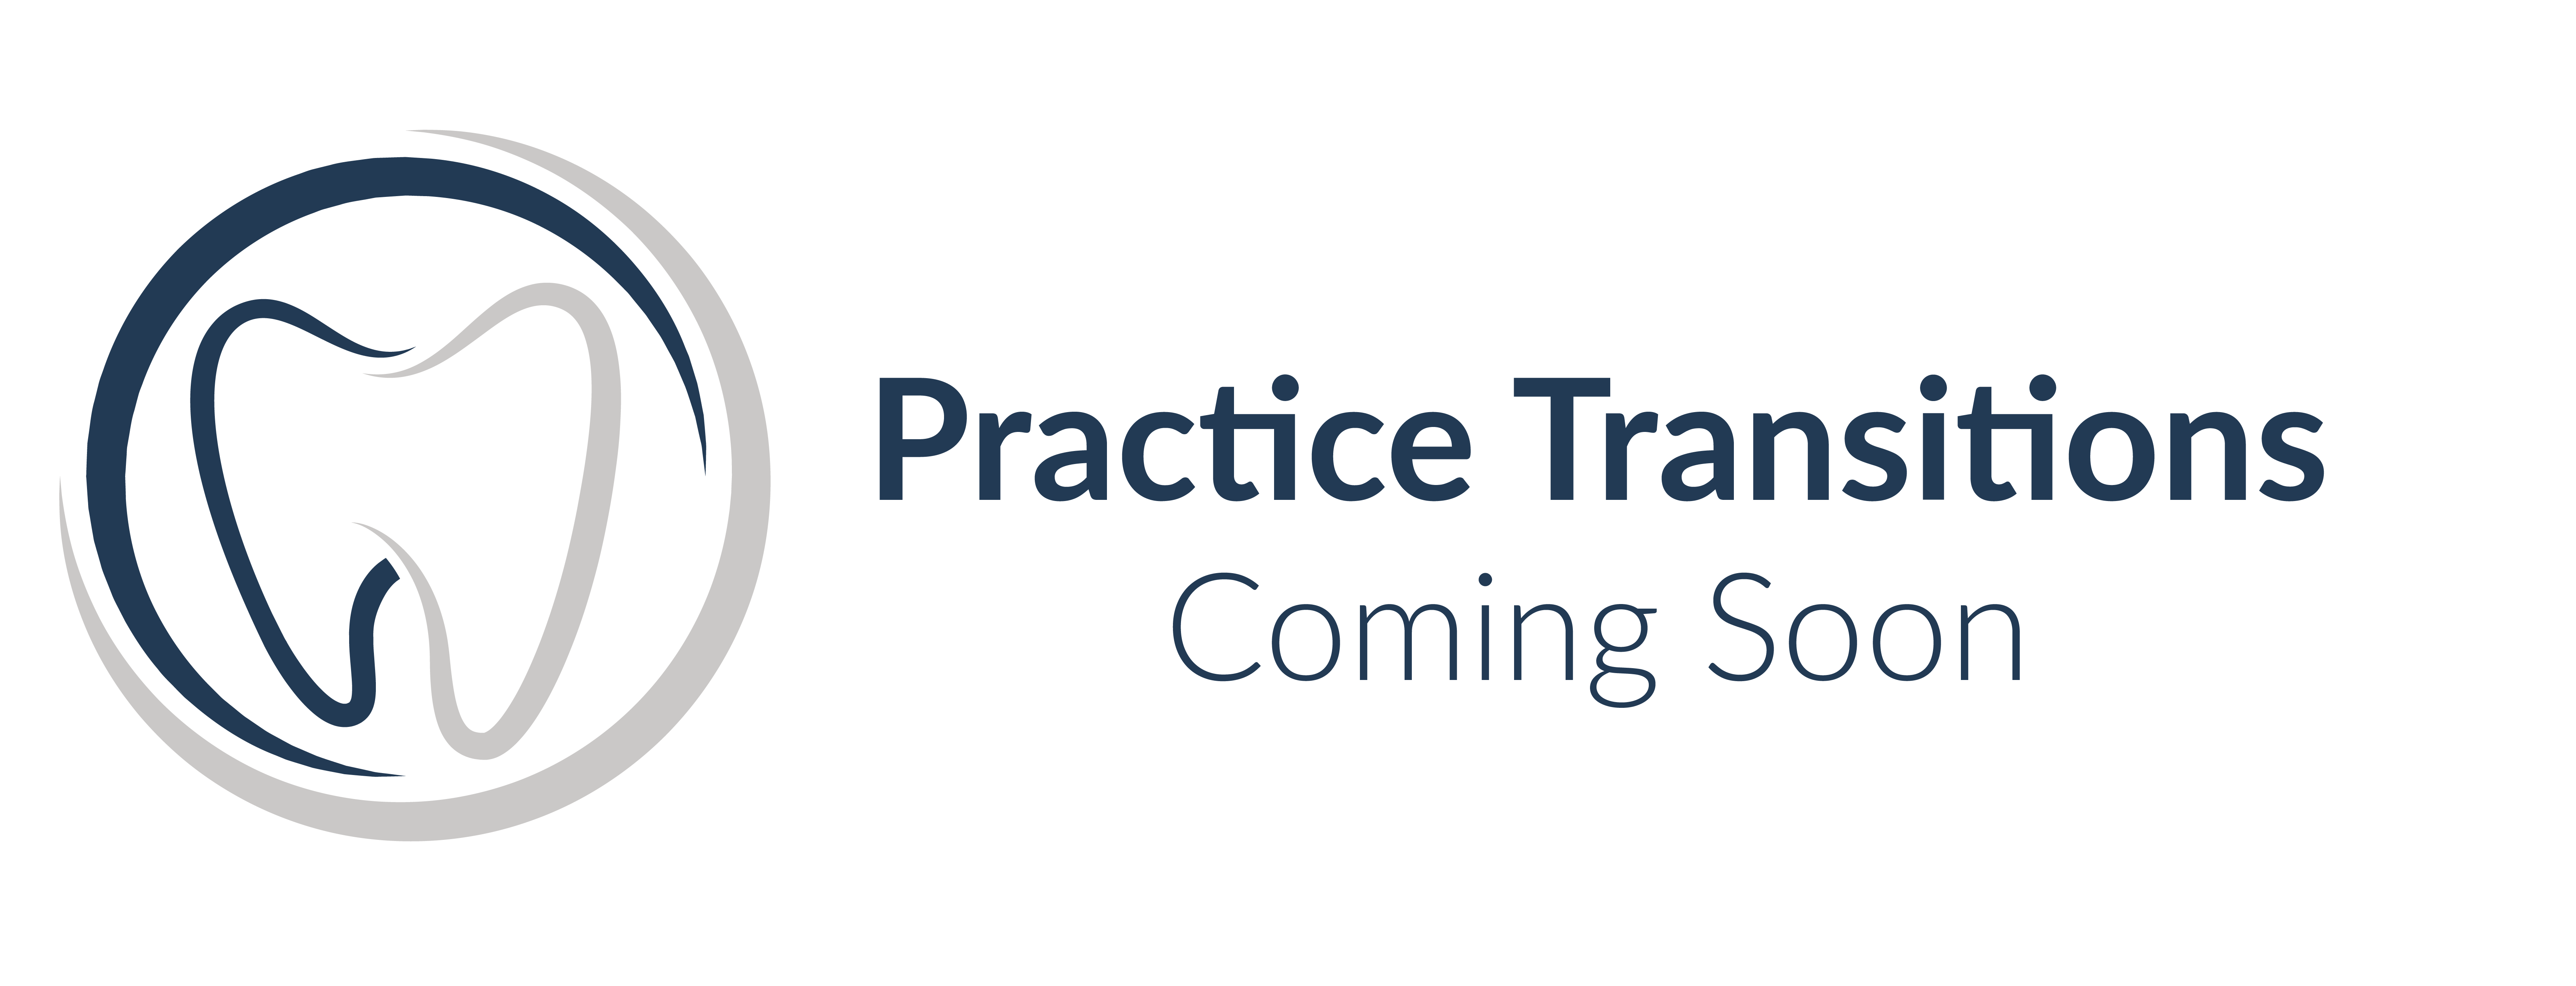 CMS Practice Transitions